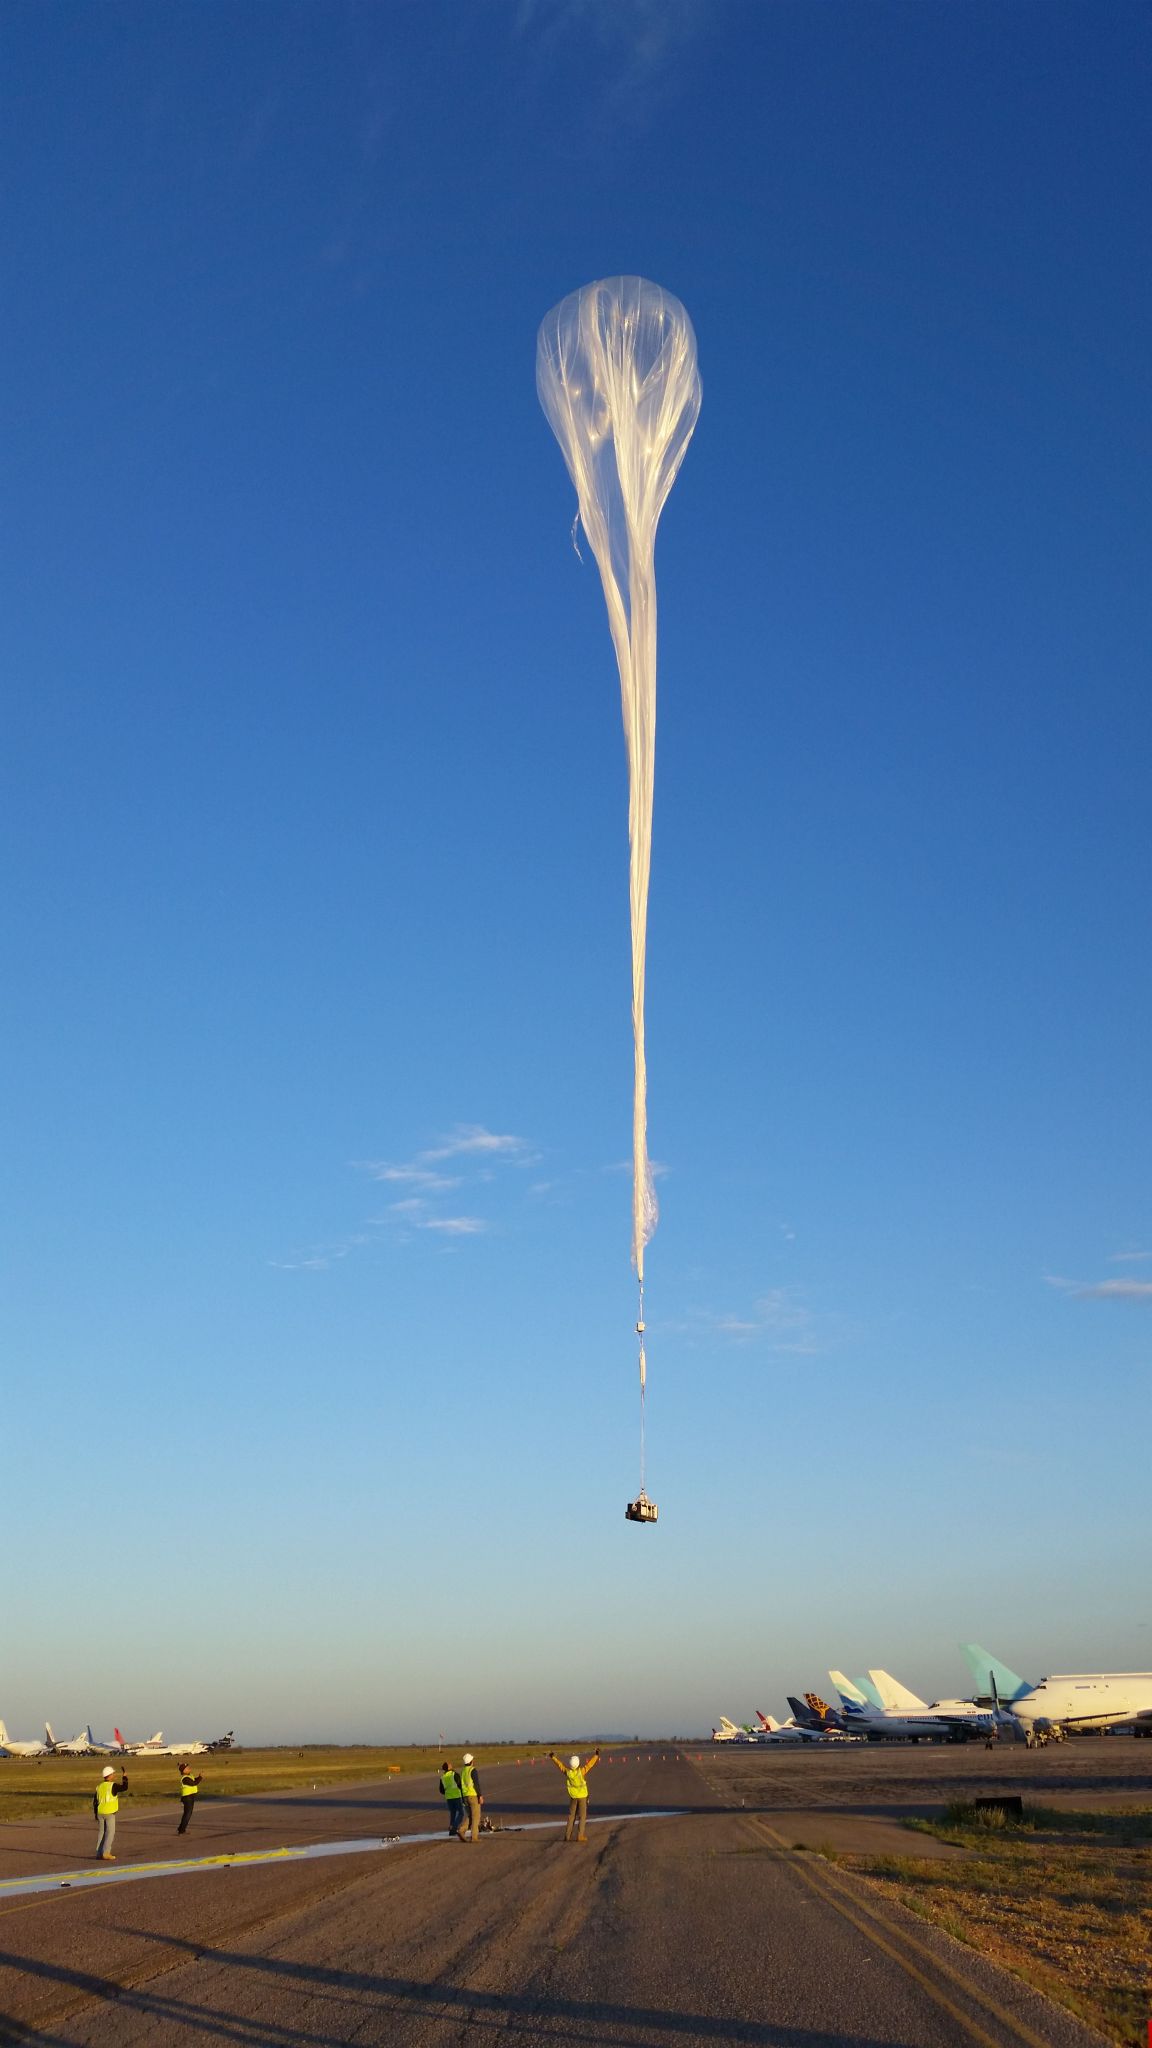 World View launches balloon providing experiments with a flight to the edge of space.